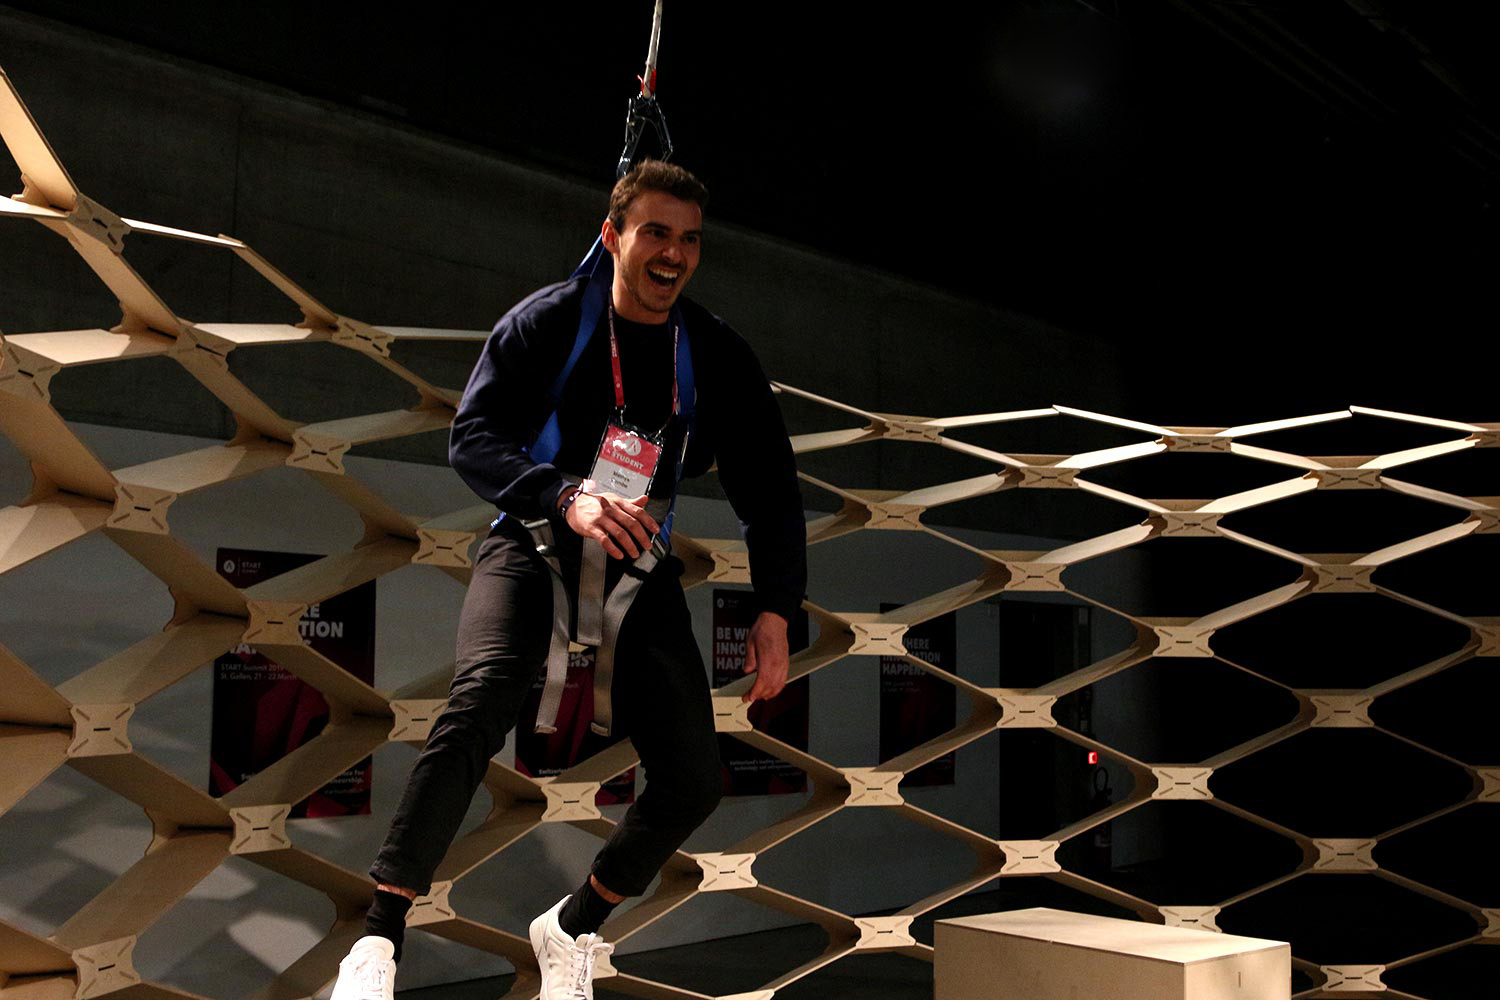 A man smiling while trying the gravity pavilion.